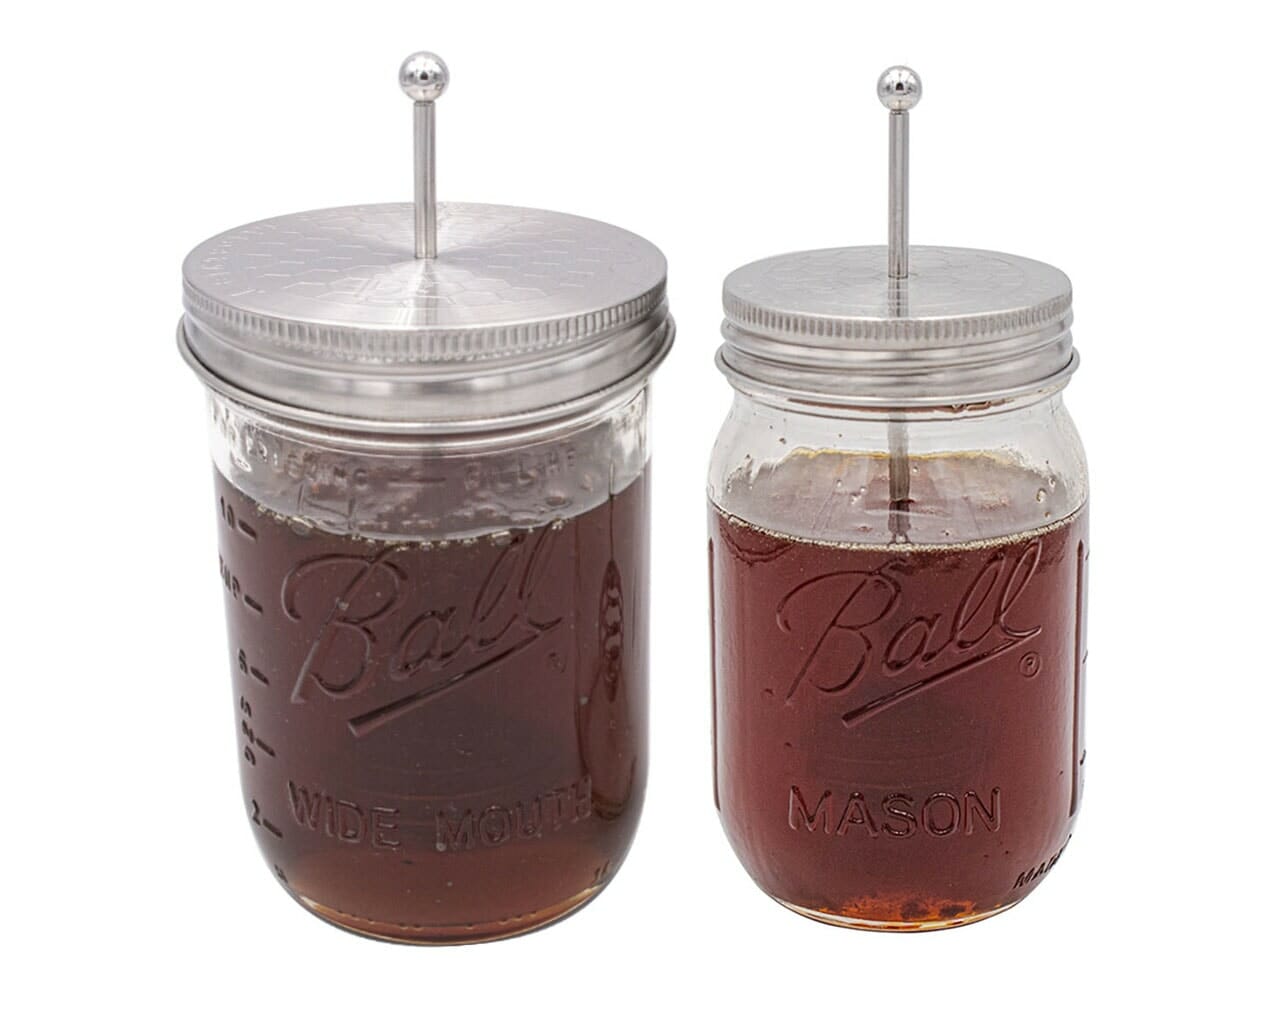 Long Safer Rounded End Stainless Steel Straw for Quart Mason Jars